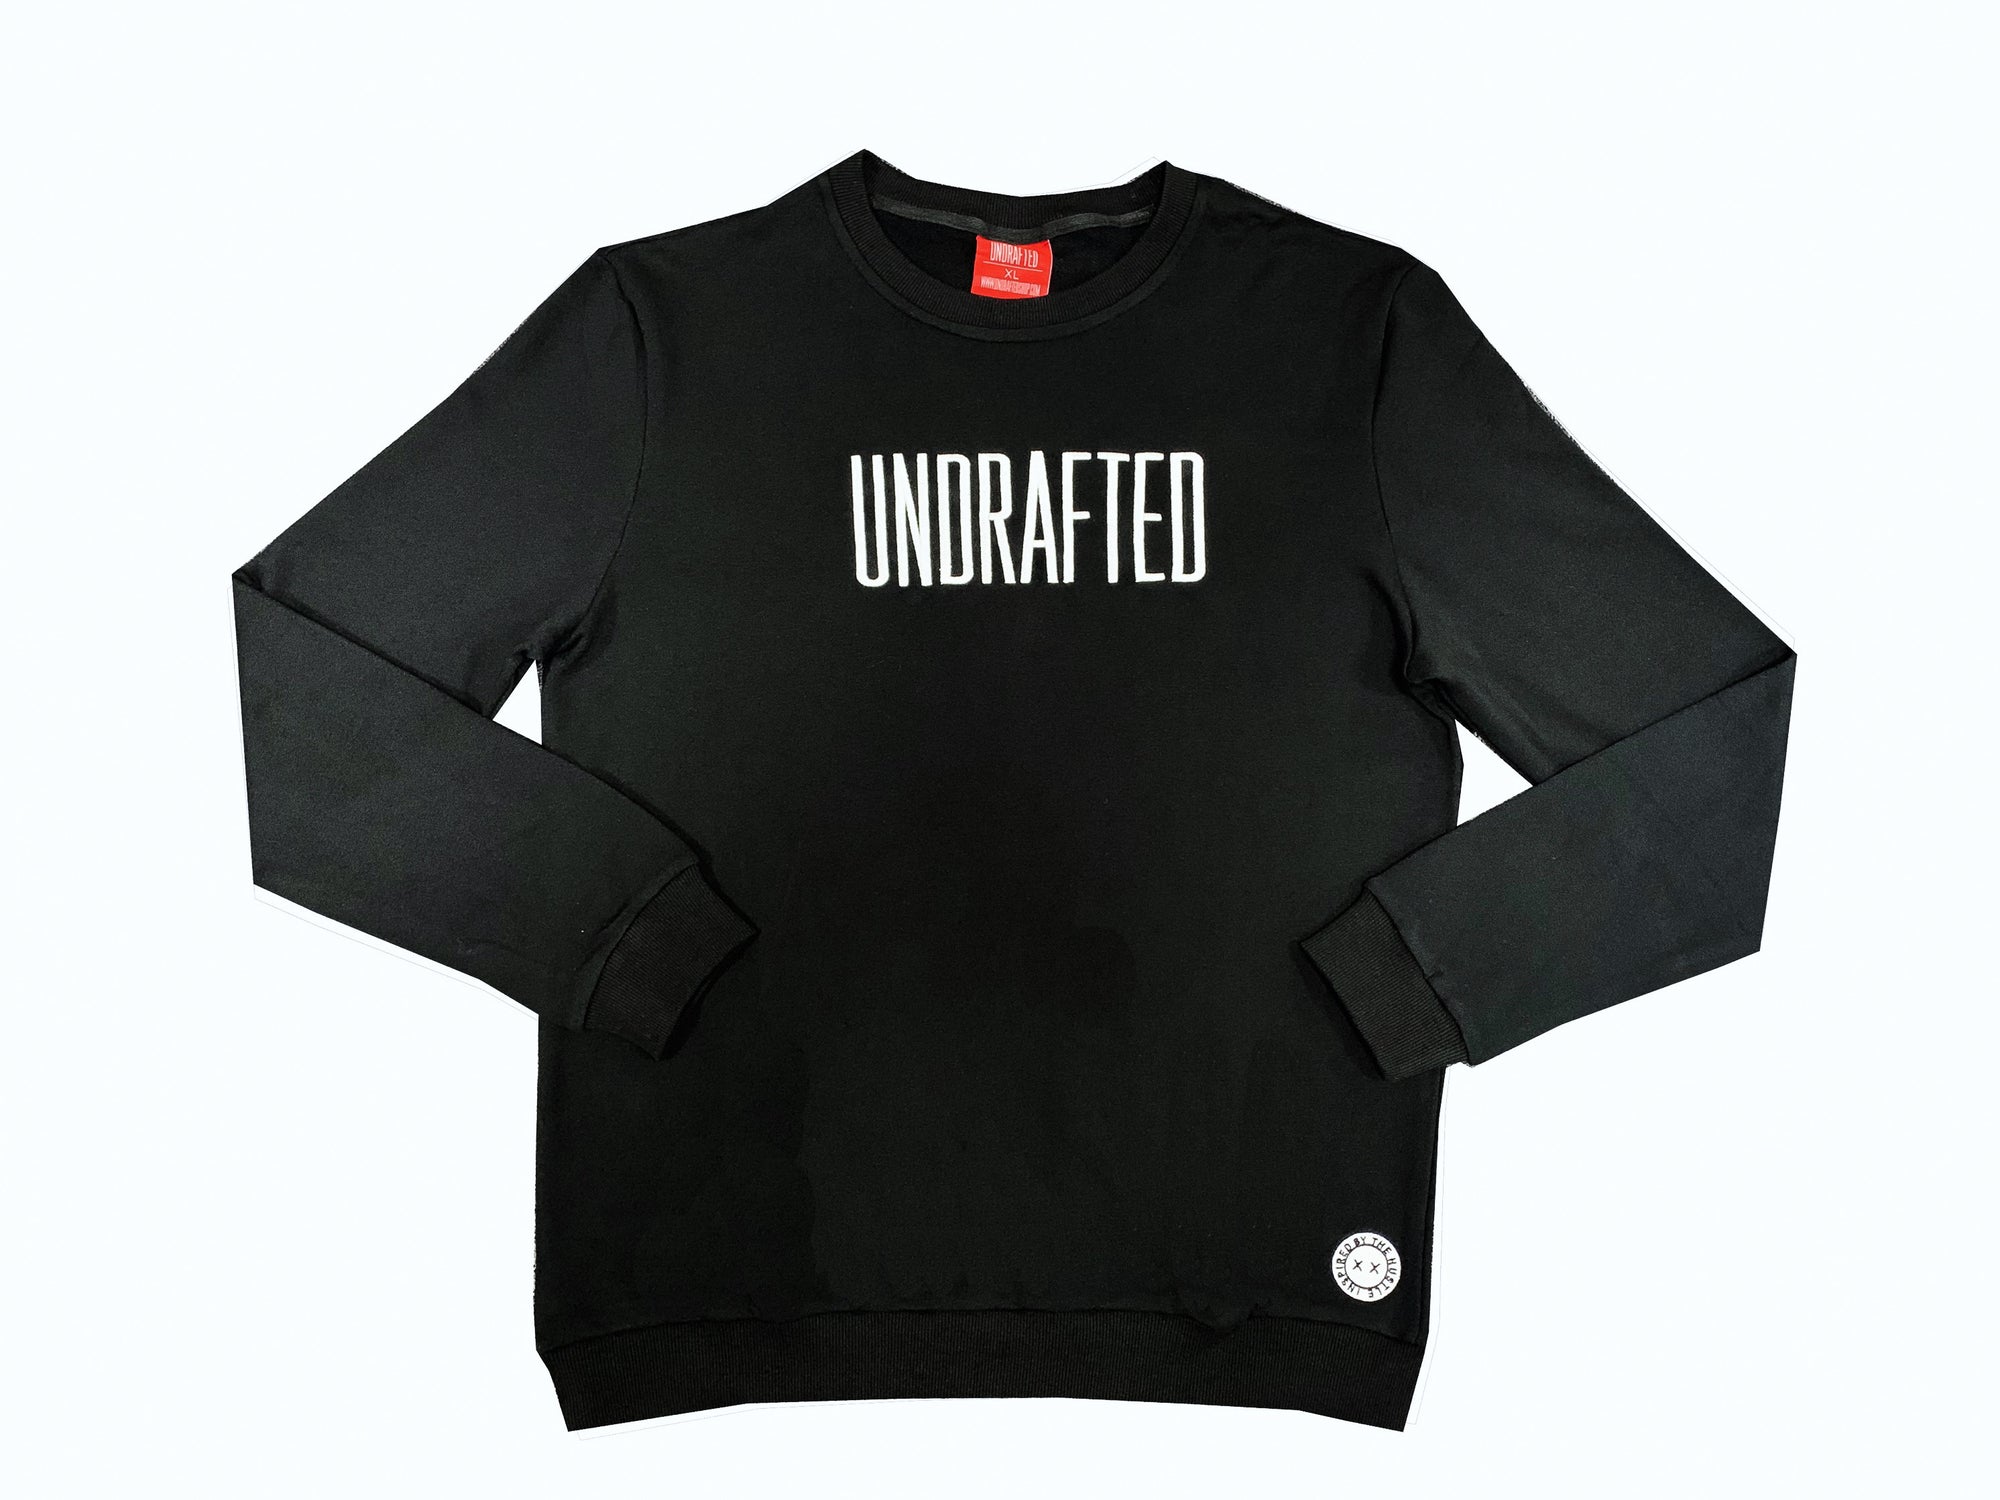 Embroidered Undrafted Sweatshirt Black/White